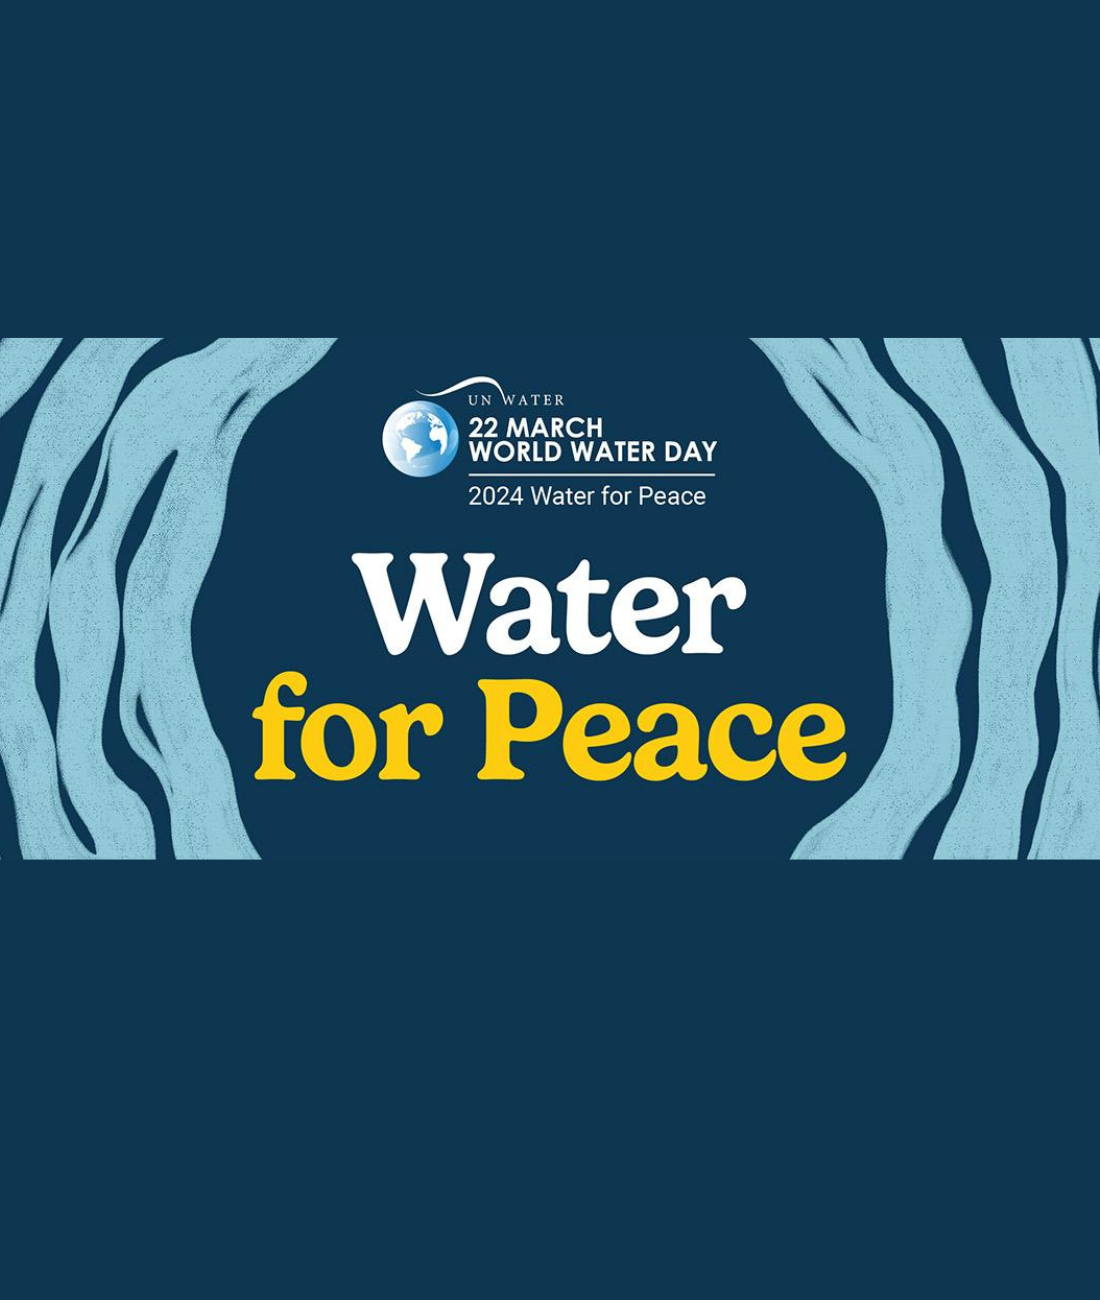 Uniting for Peace on World Water Day 2024